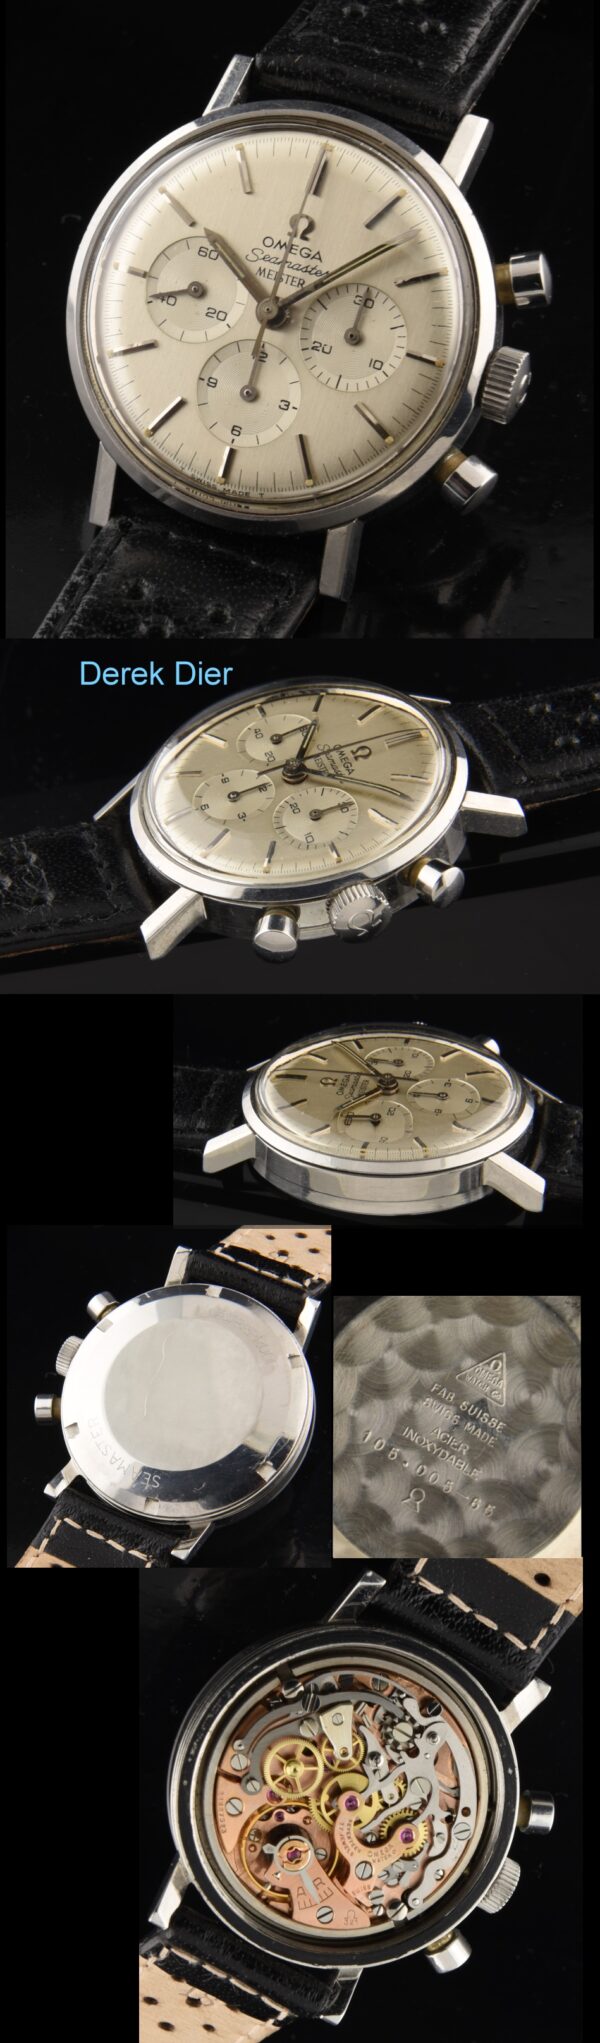 1965 Omega Seamaster stainless steel chronograph watch with original Meister-signed dial, hands, winding crown, and caliber 321 movement.